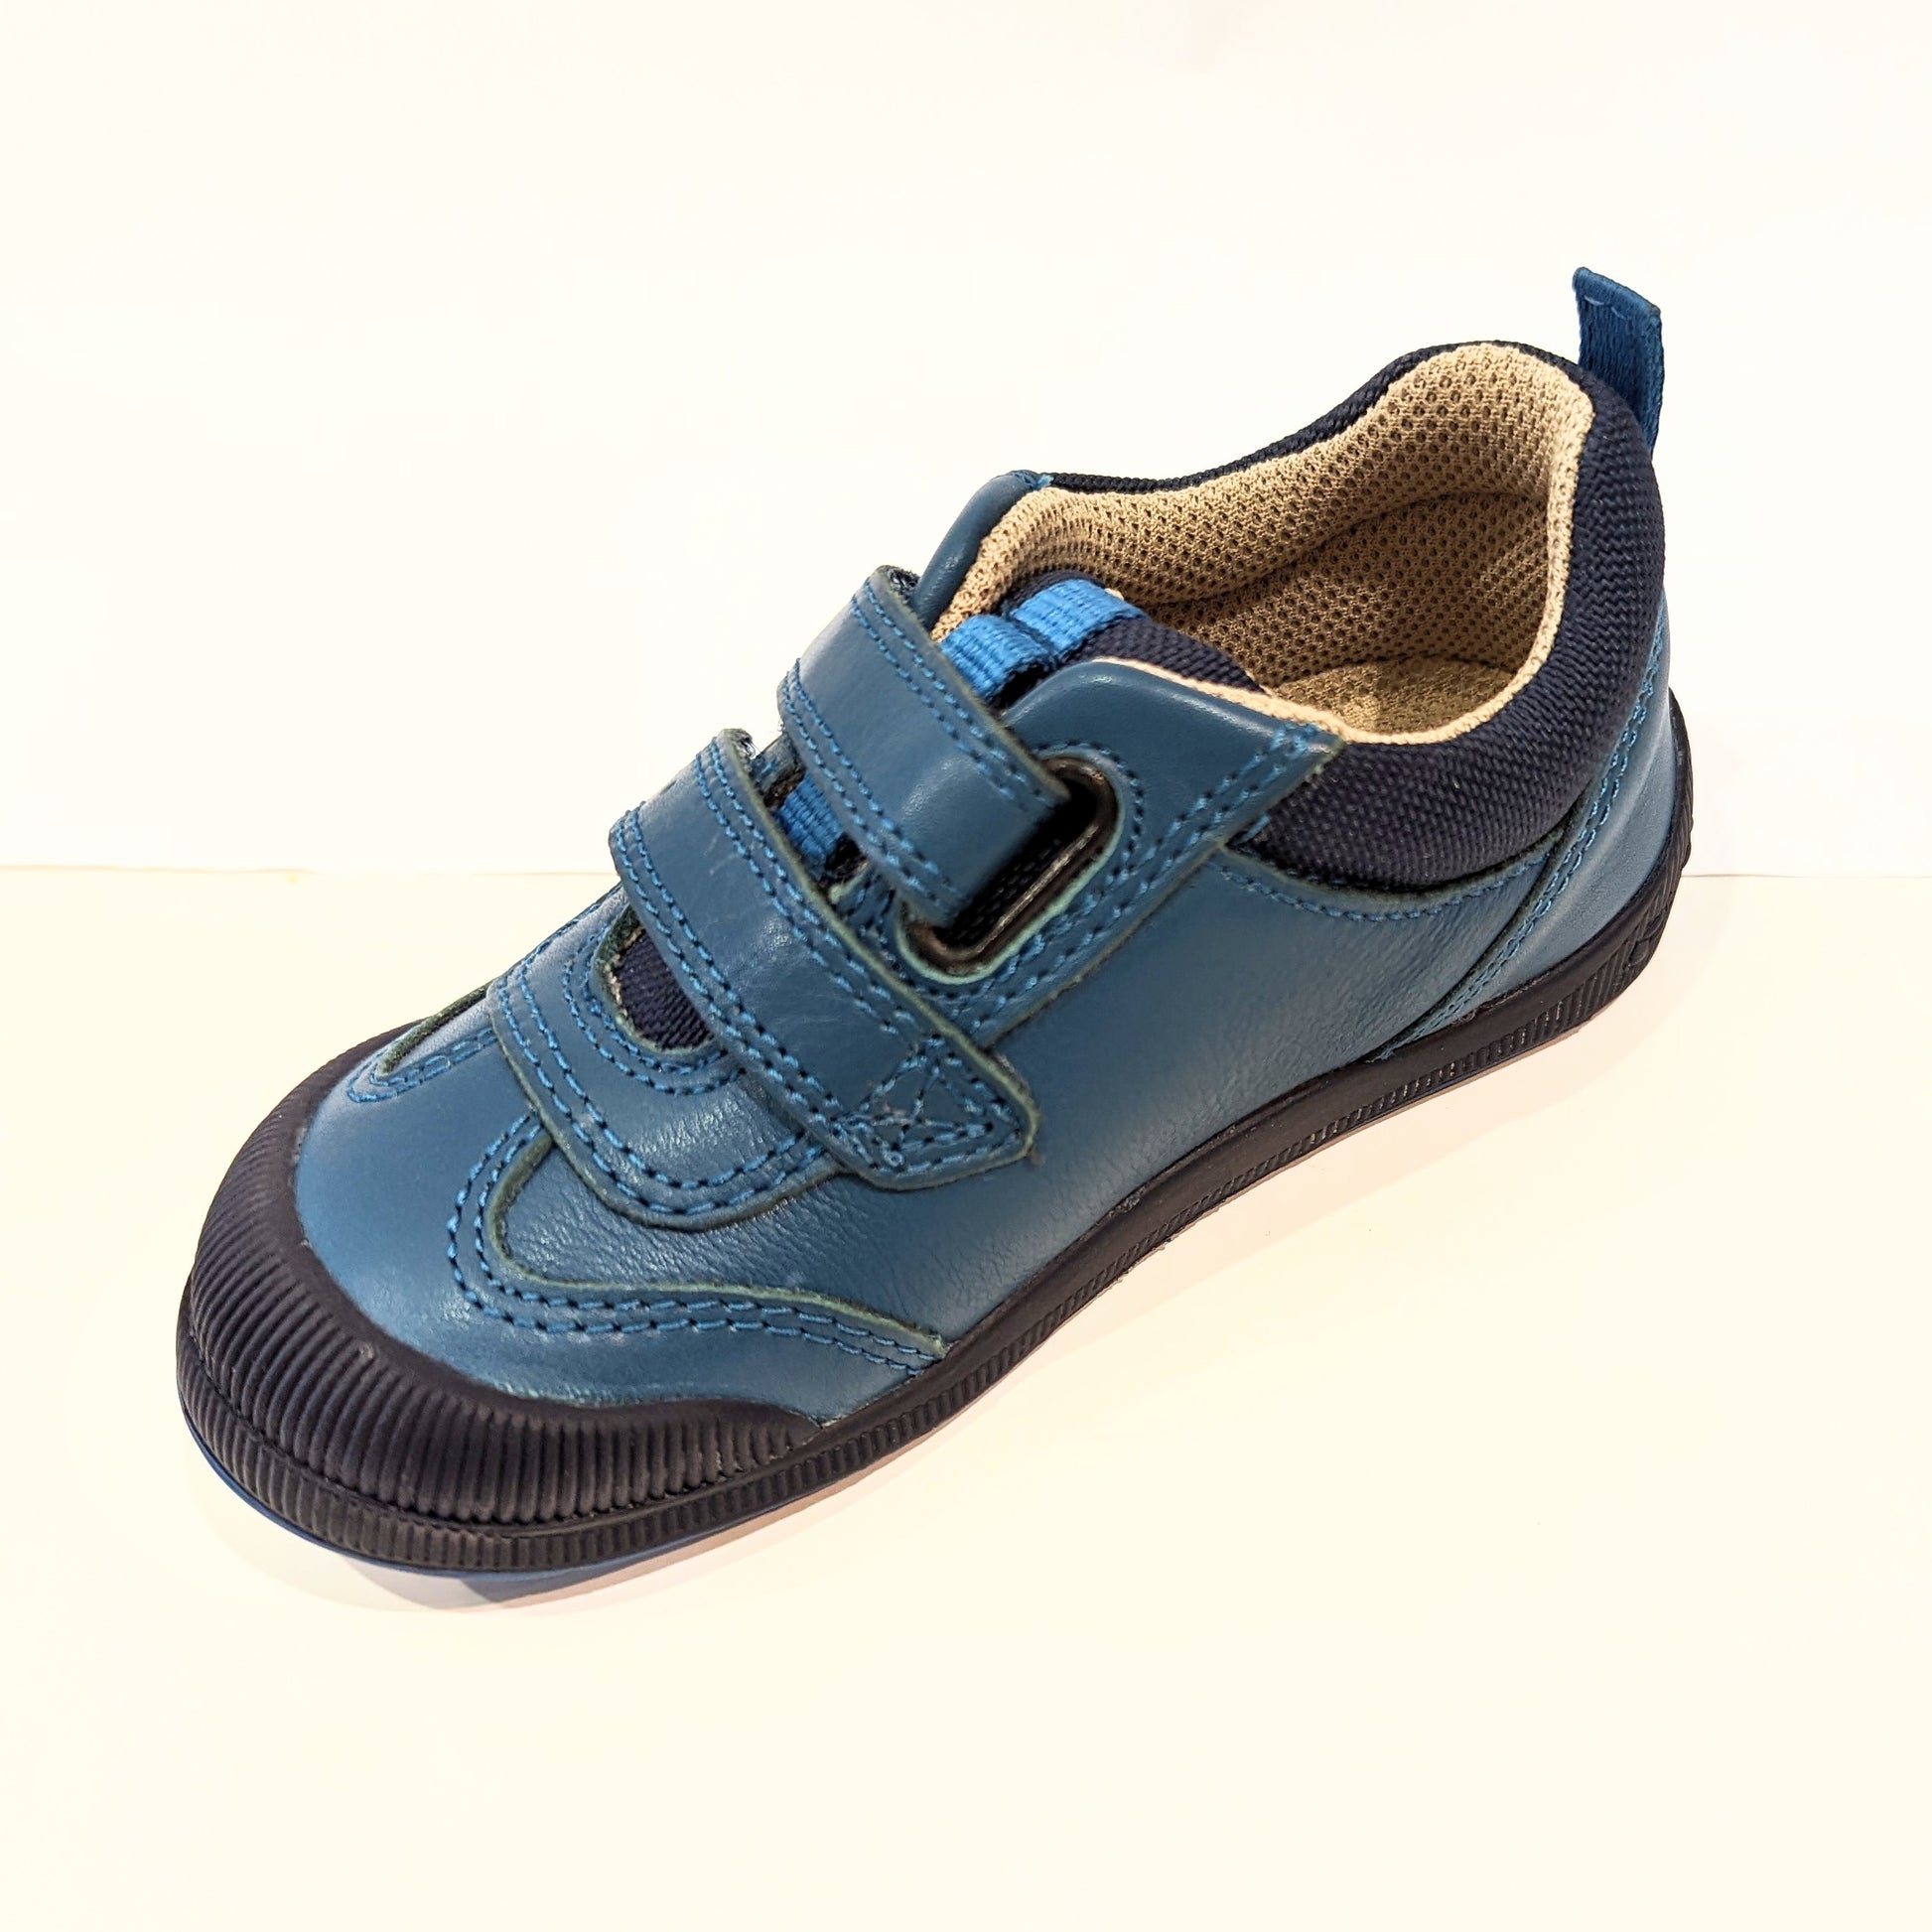 A boys casual shoe by Start Rite, style Tickle, in teal leather with double velcro fastening. Angled view.